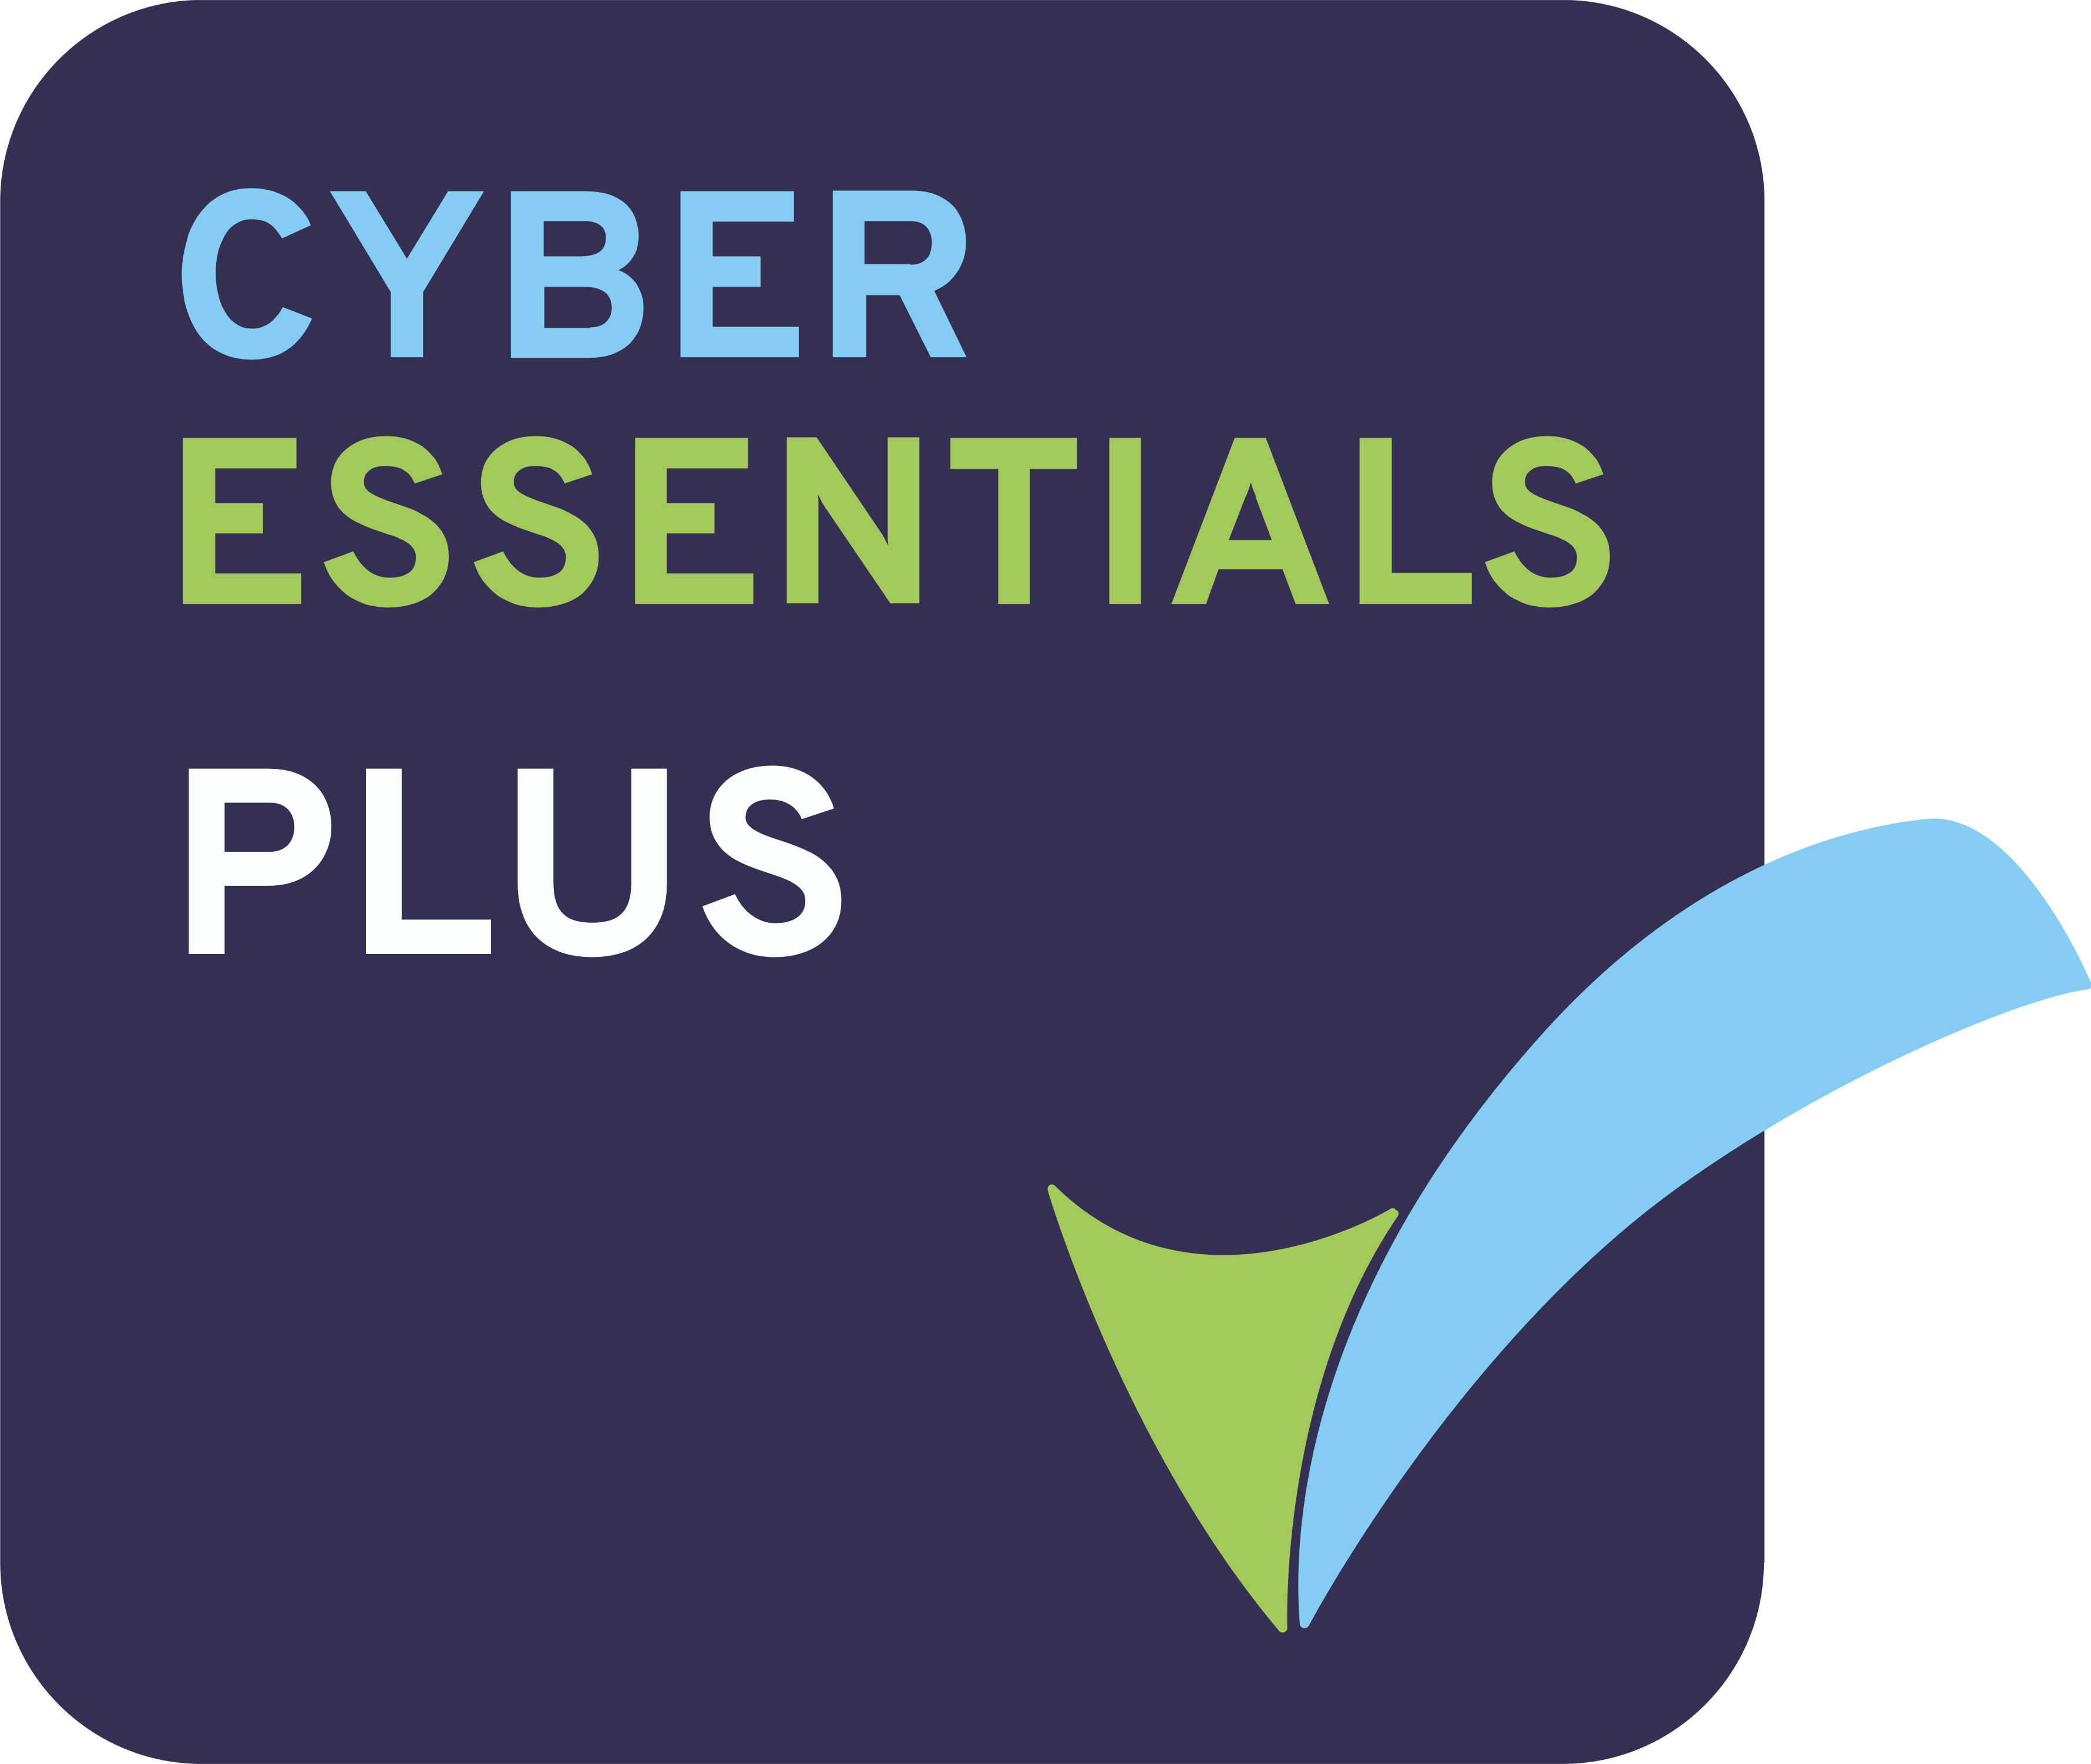 The National Cyber Security Centre's Cyber Essentials Plus hallmark